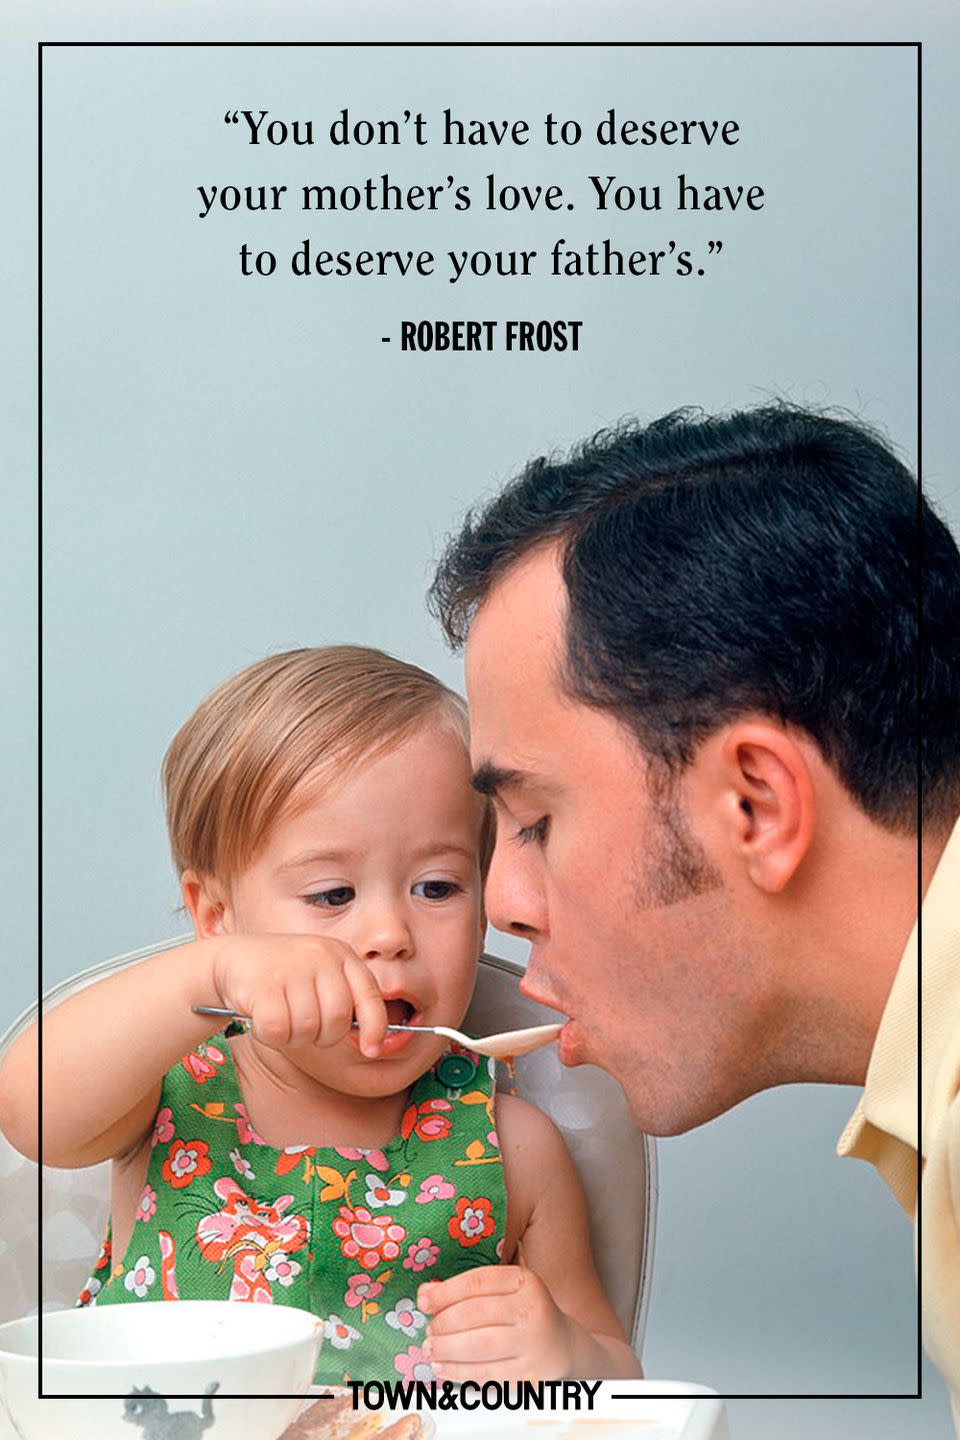 <p>"You don't have to deserve your mother's love. You have to deserve your father's."</p><p>- Rober Frost</p>